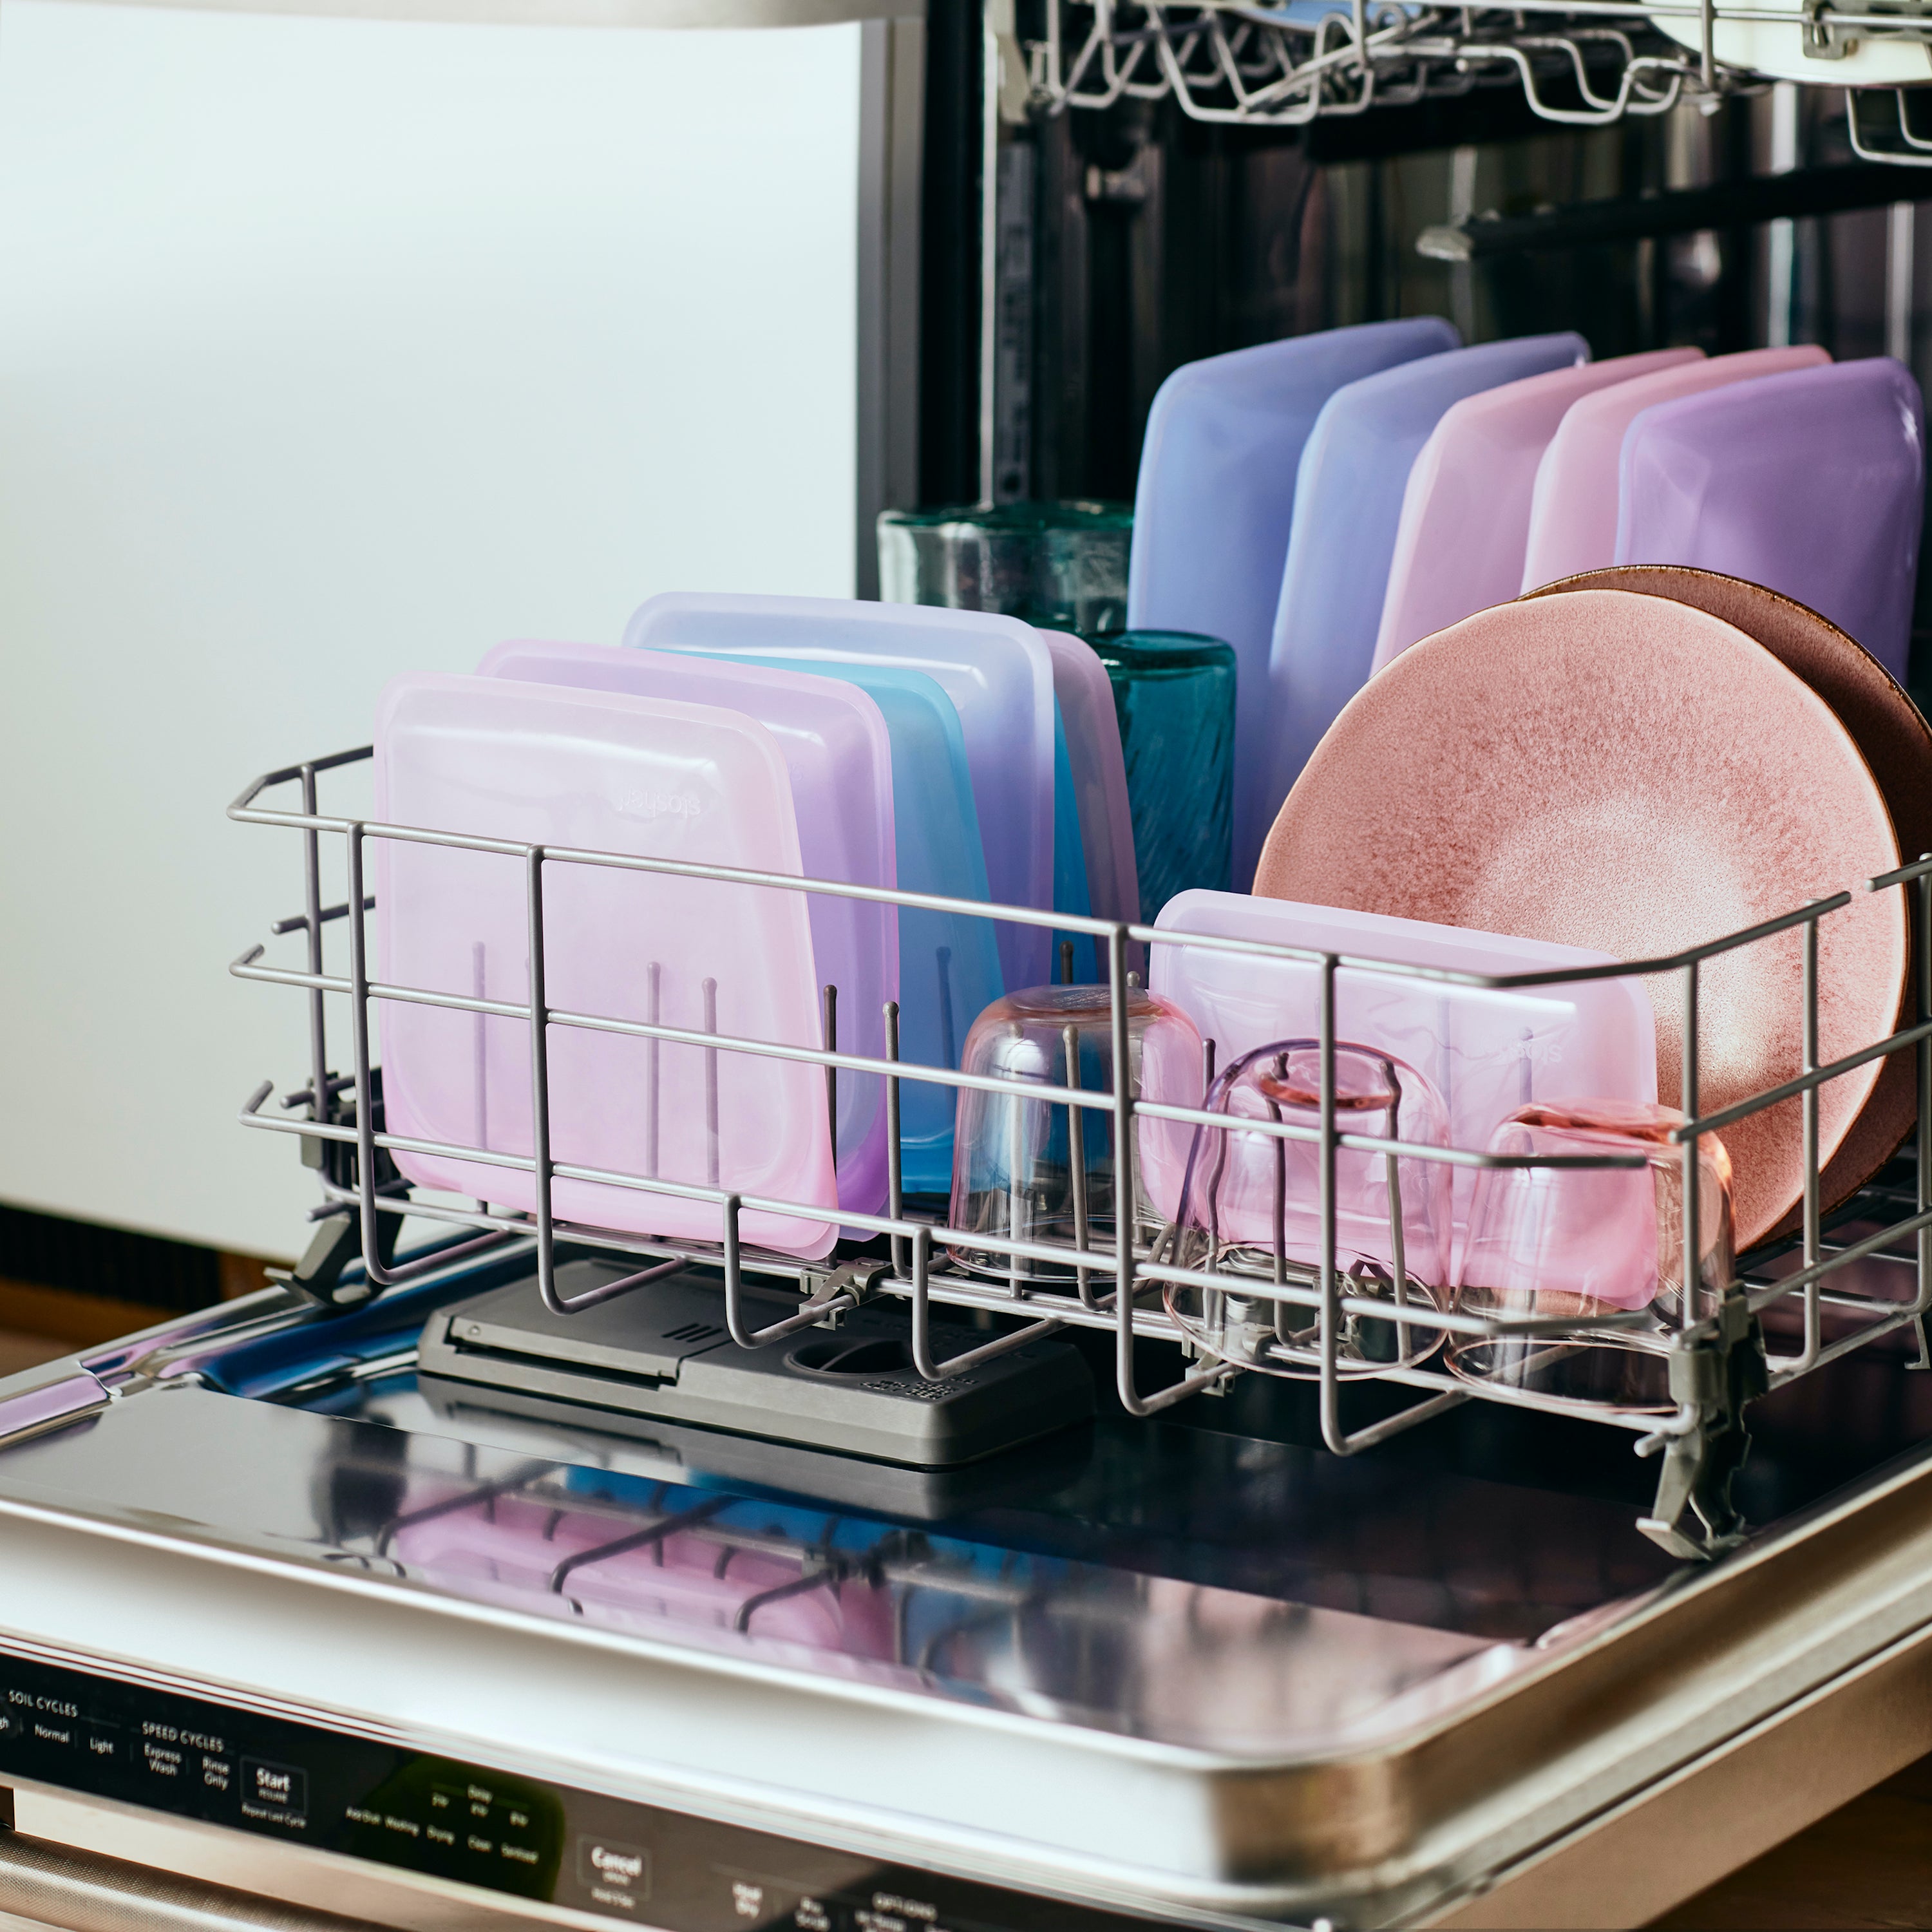 How (and Why!) to Clean a Dish Rack in the Dishwasher